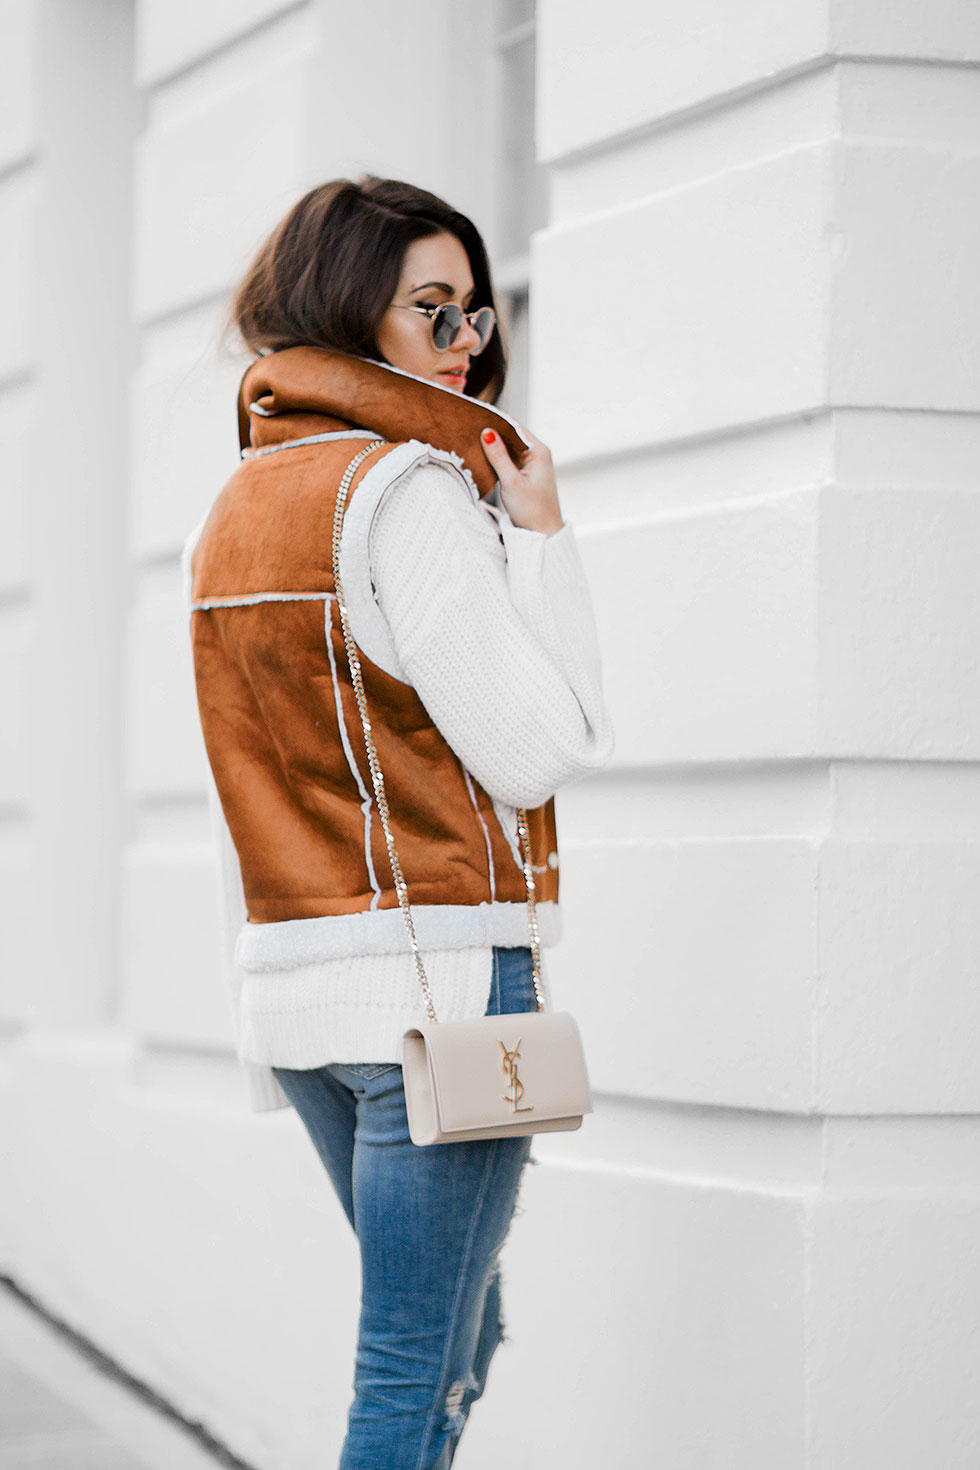 shearling vest outfit idea for winter --- featuring Rachel Zoe Jordy Turtleneck Sweater, Faux-Shearling Vest, Saint Laurent Monogramme Chain Shoulder Bag, Distressed Skinny Jeans, Ray Ban 50mm Retro Round Metal Sunglasses